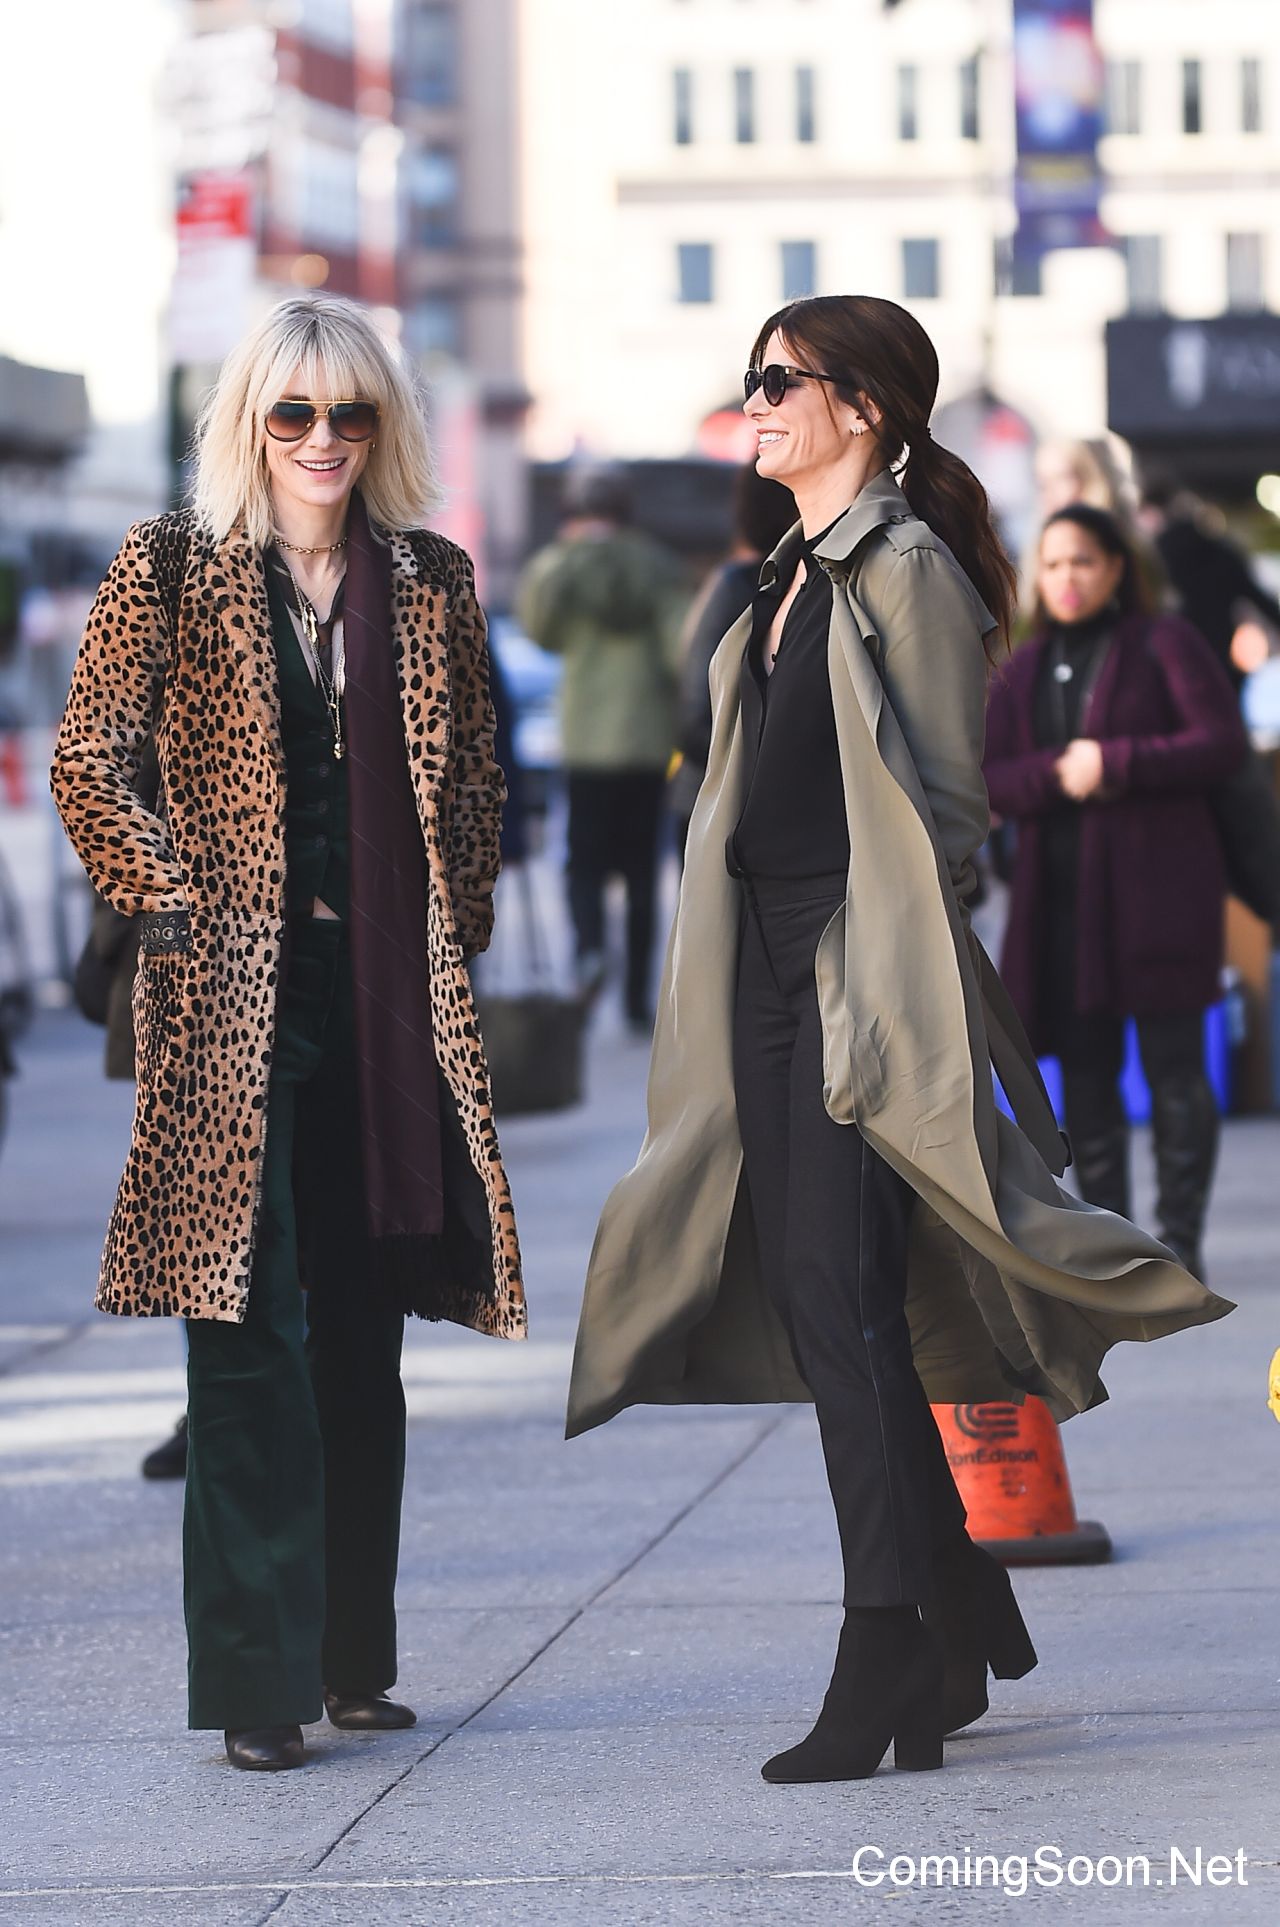 NEW YORK, NY - OCTOBER 24:  Actresses Cate Blanchett and Sandra Bullock (L) are seen on the set of "Ocean's Eight" on October 24, 2016 in New York City.  (Photo by Raymond Hall/GC Images)